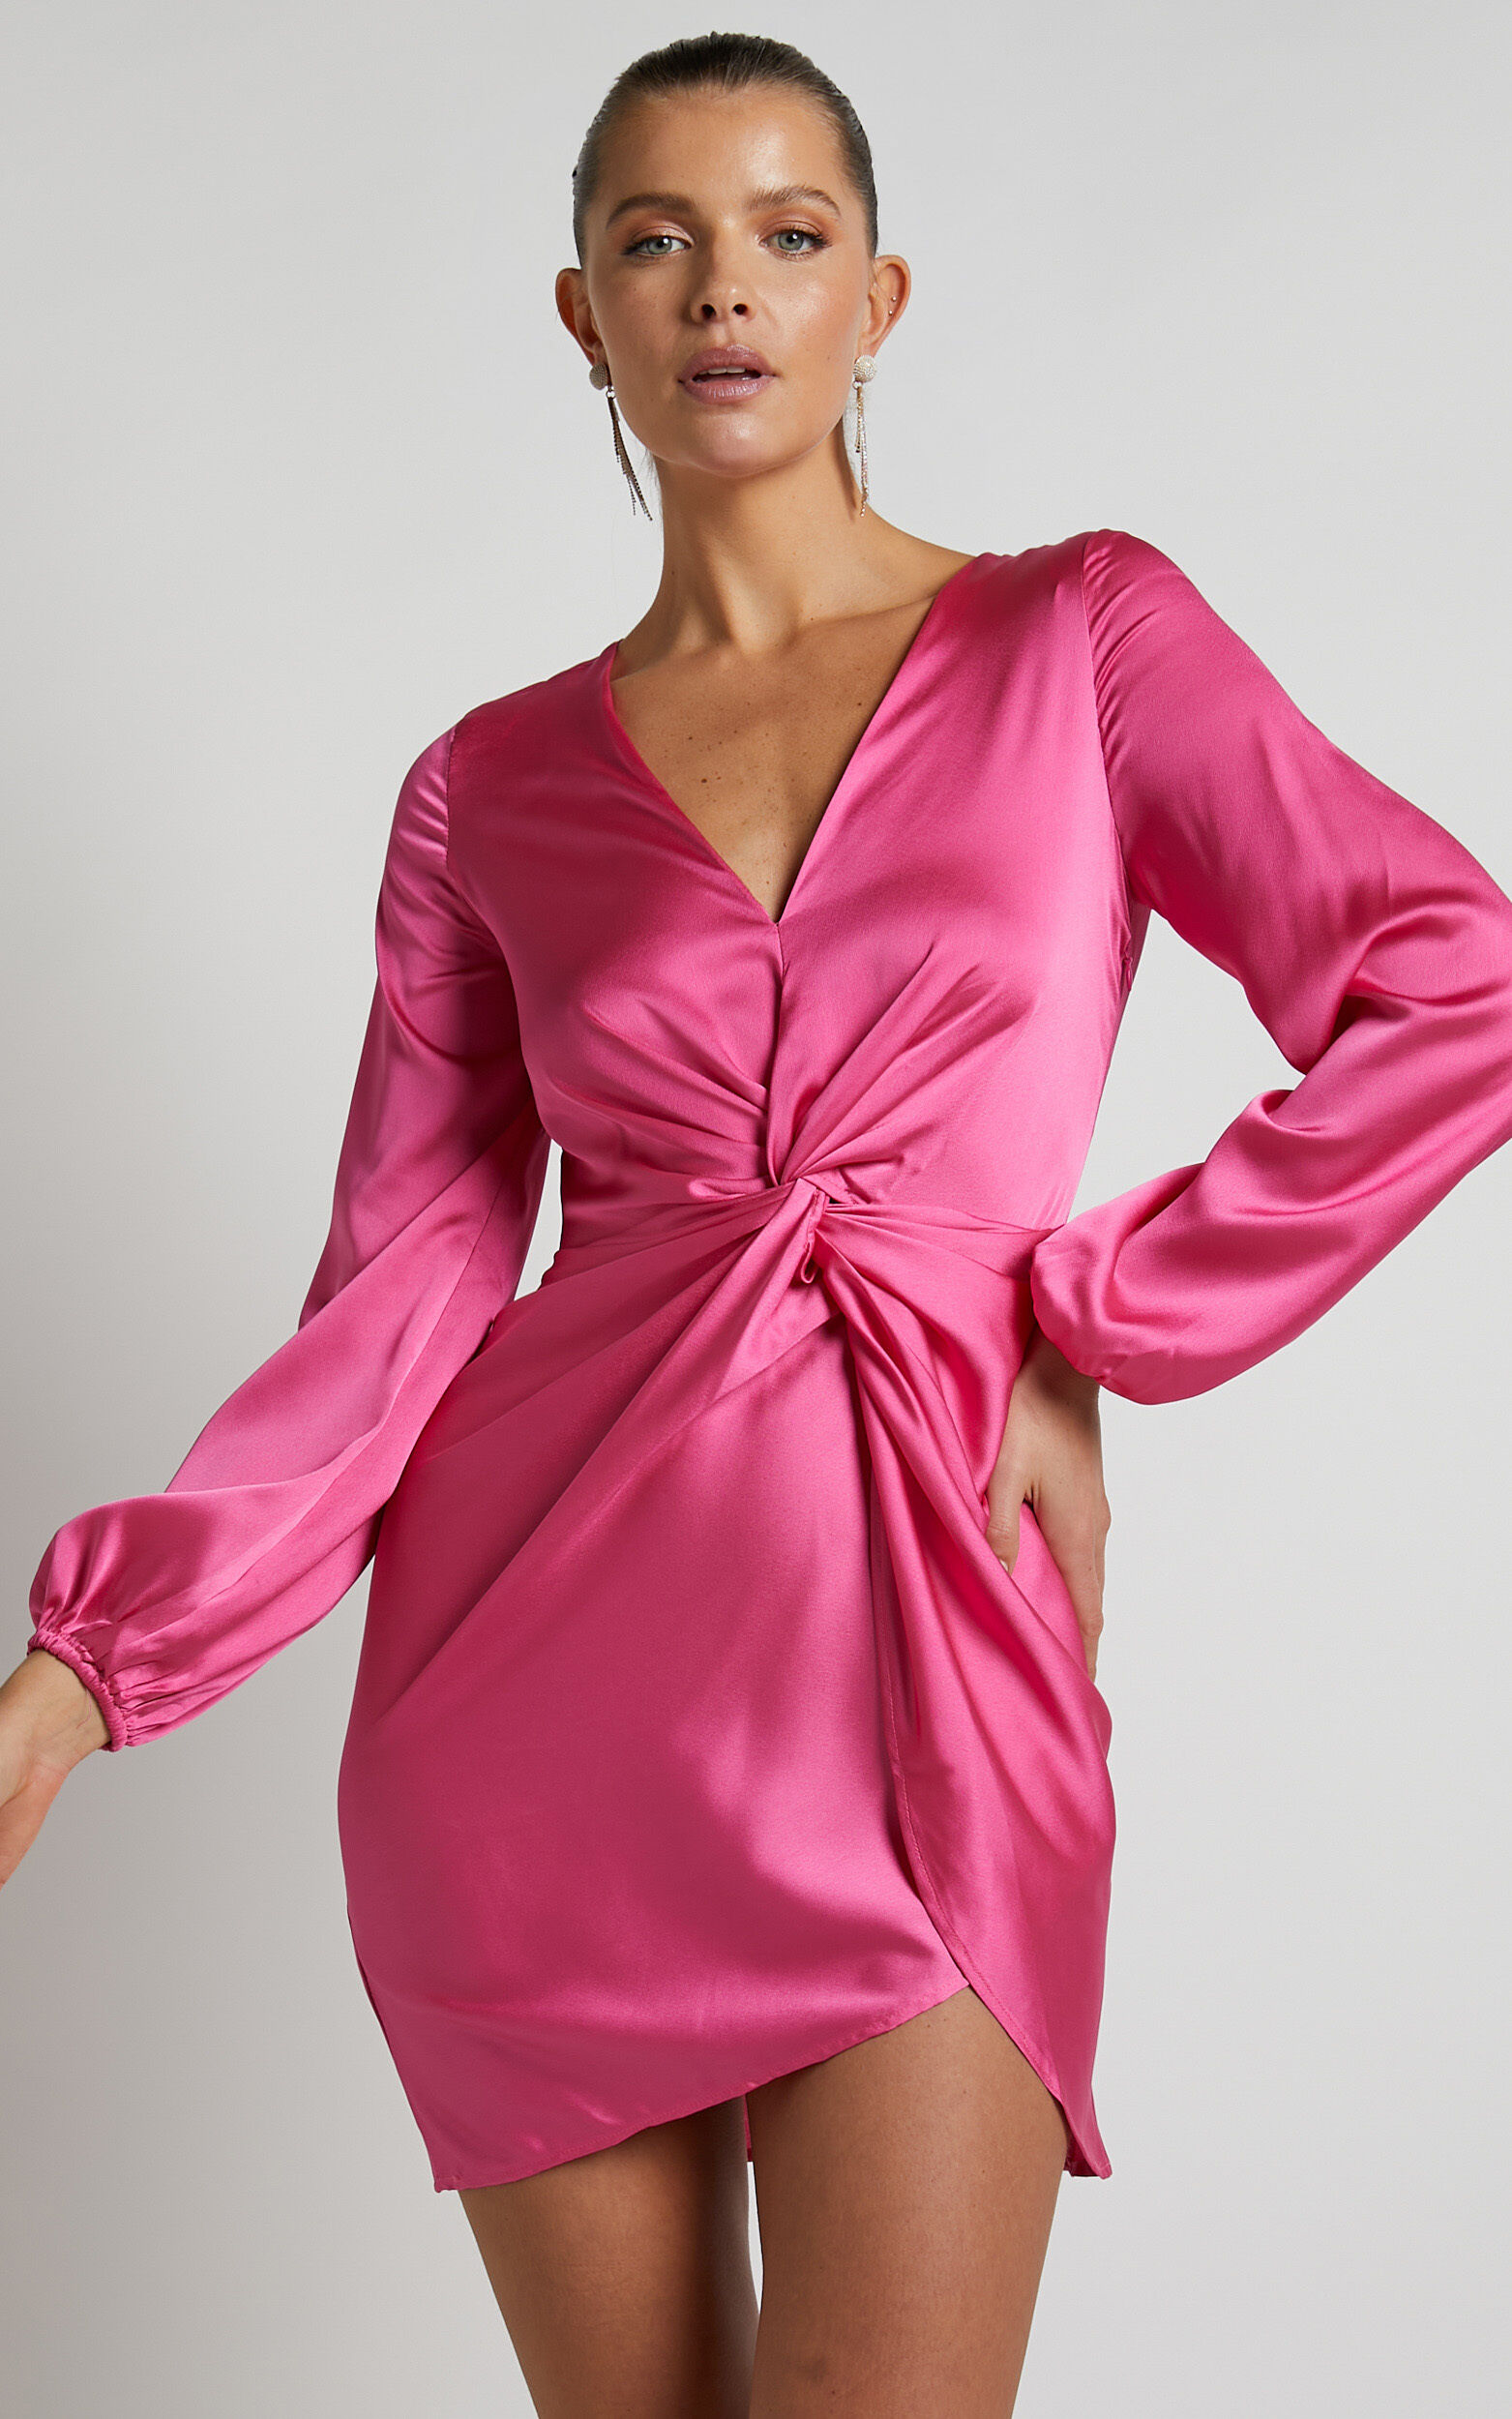 Everest Twist Front relaxed sleeve mini dress in Hot pink - 06, PNK1, super-hi-res image number null